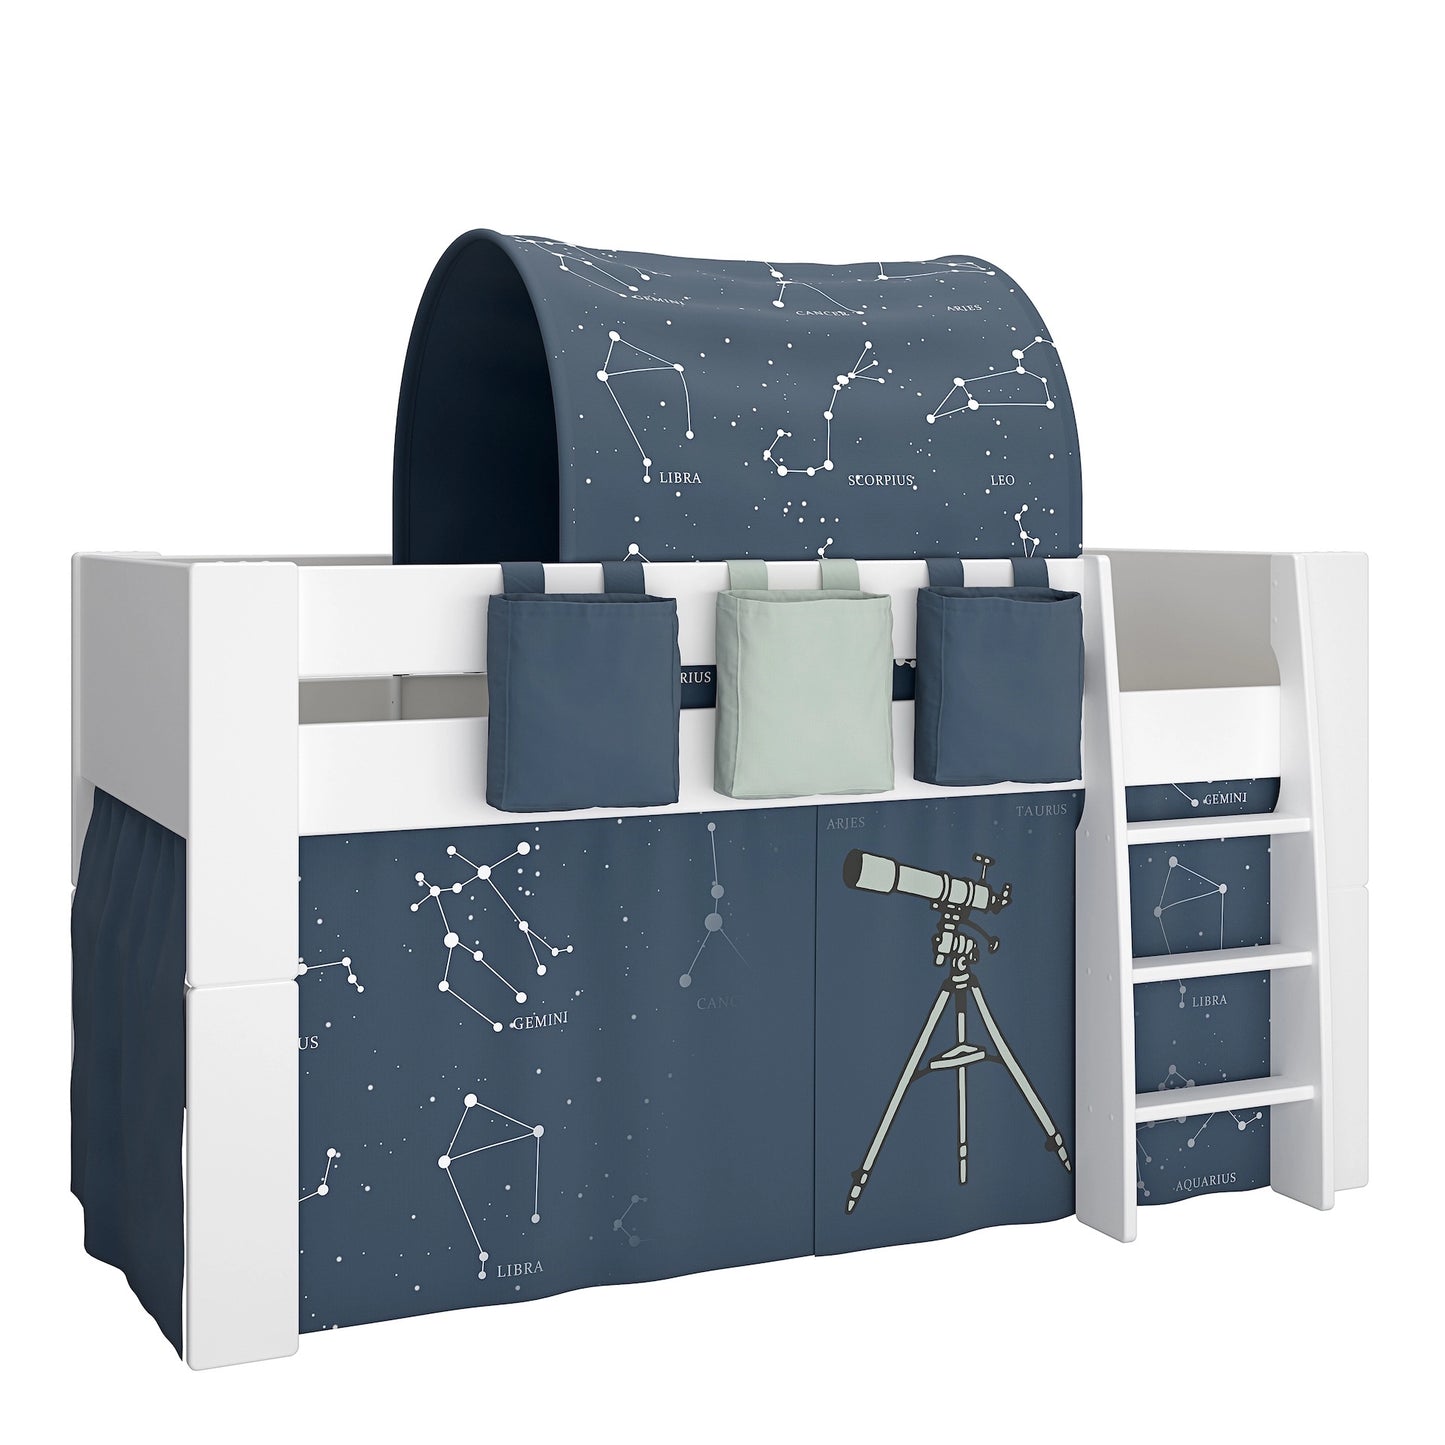 Furniture To Go Steens For Kids Mid Sleeper in Whitewash Grey Brown Lacquered, Includes - Universe Tent + Tunnel + 2 Pockets in Blue + 1 Pocket in Green